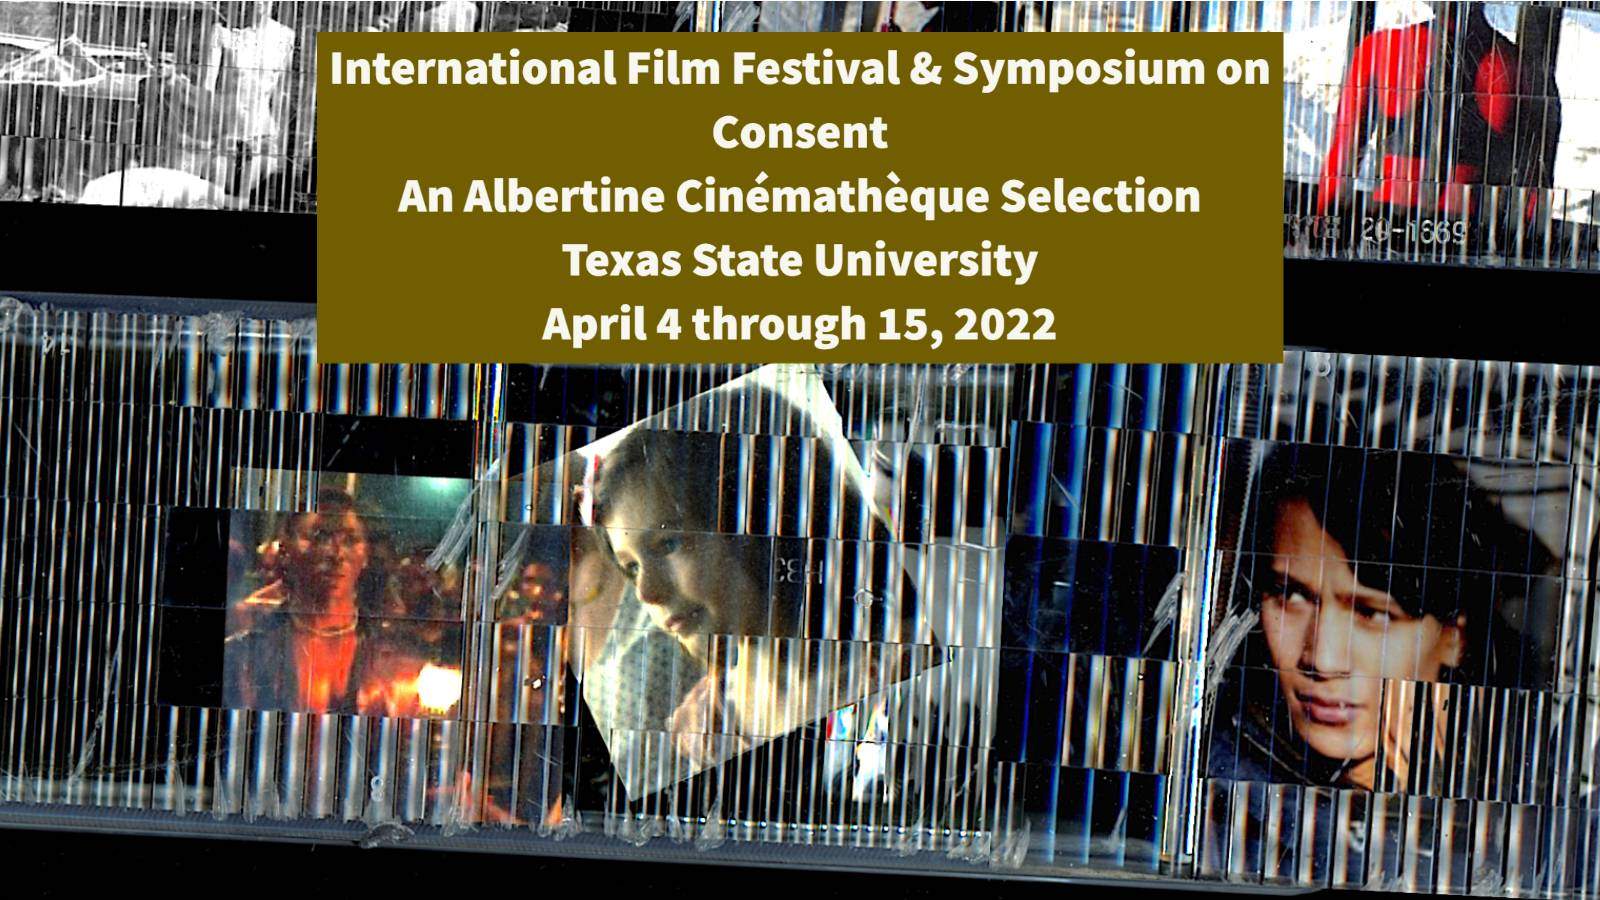 Image: collage with multiple film frames, two depicting women, one depicting a man. Text: Film Festival & Symposium on Consent, An Albertine Cinémathèque Selection, Texas State University, April 4-15, 2022